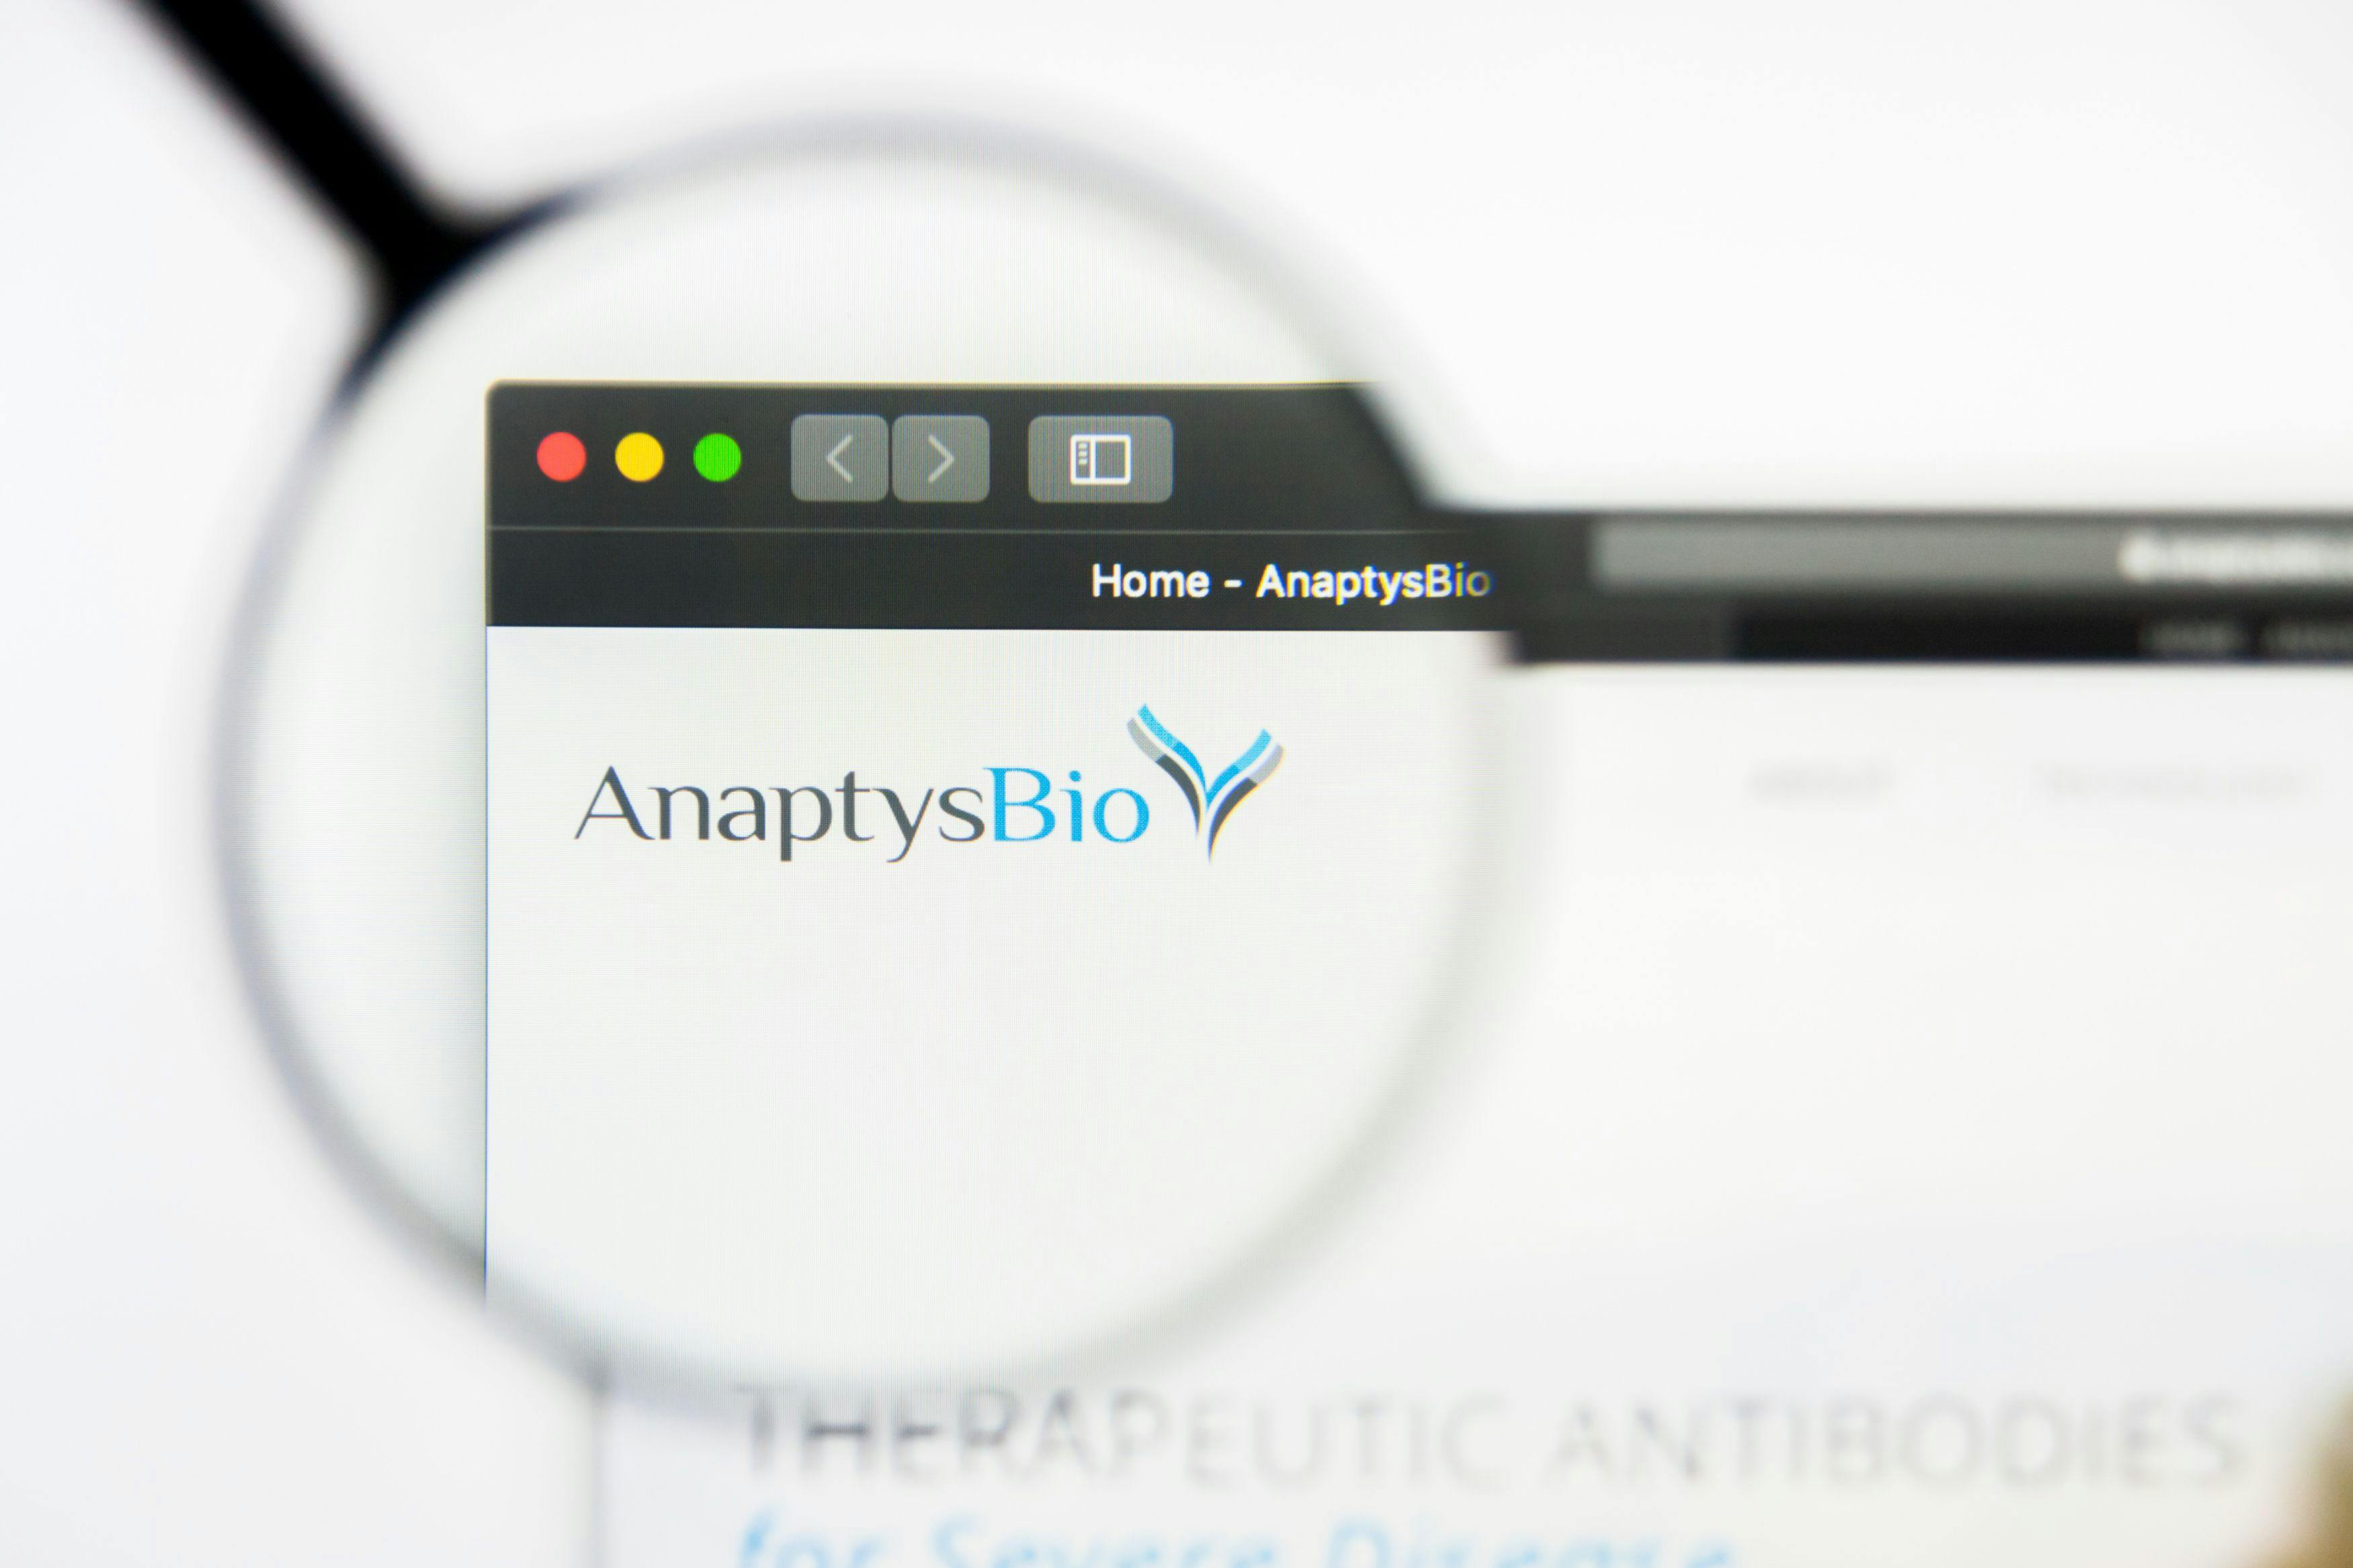 AnaptysBio Releases Positive Top-Line Phase 3 Results of Imsidolimab for GPP Flares